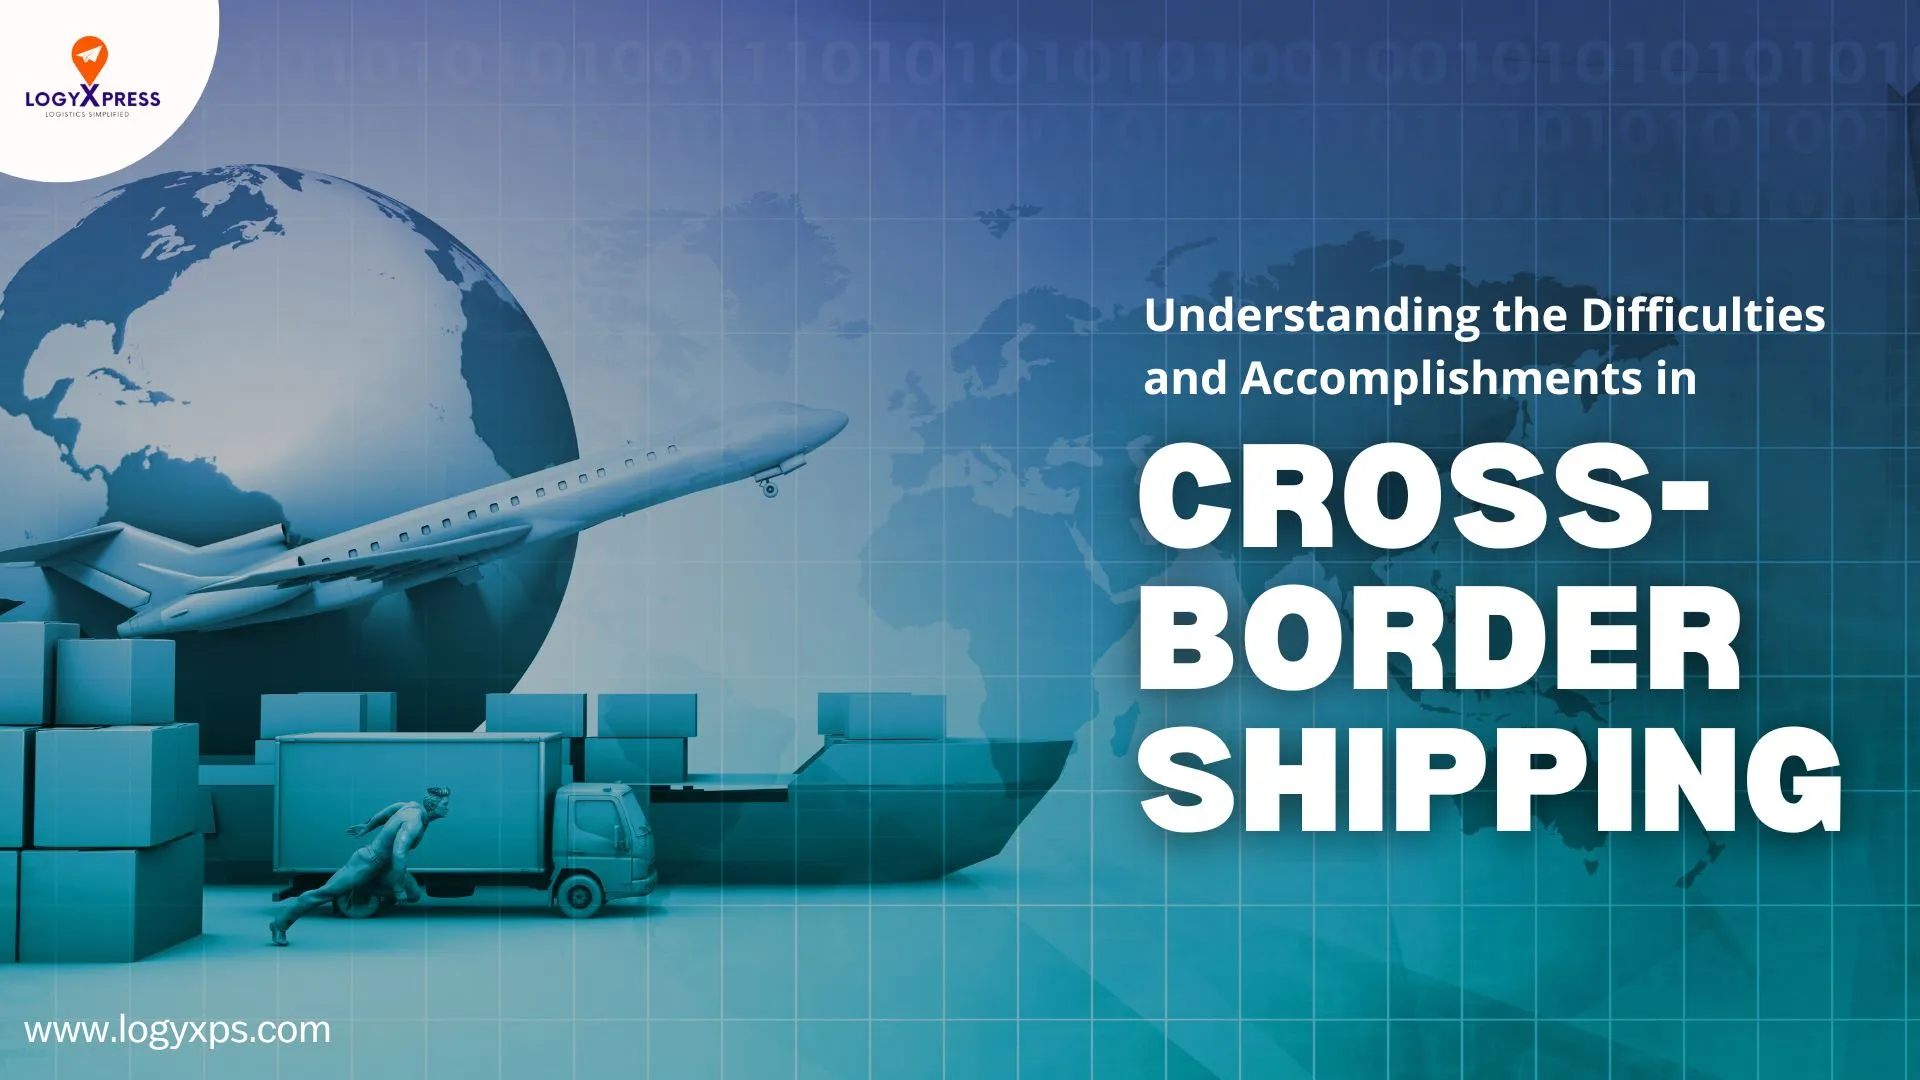 Understanding the Difficulties and Accomplishments in Cross-border Shipping